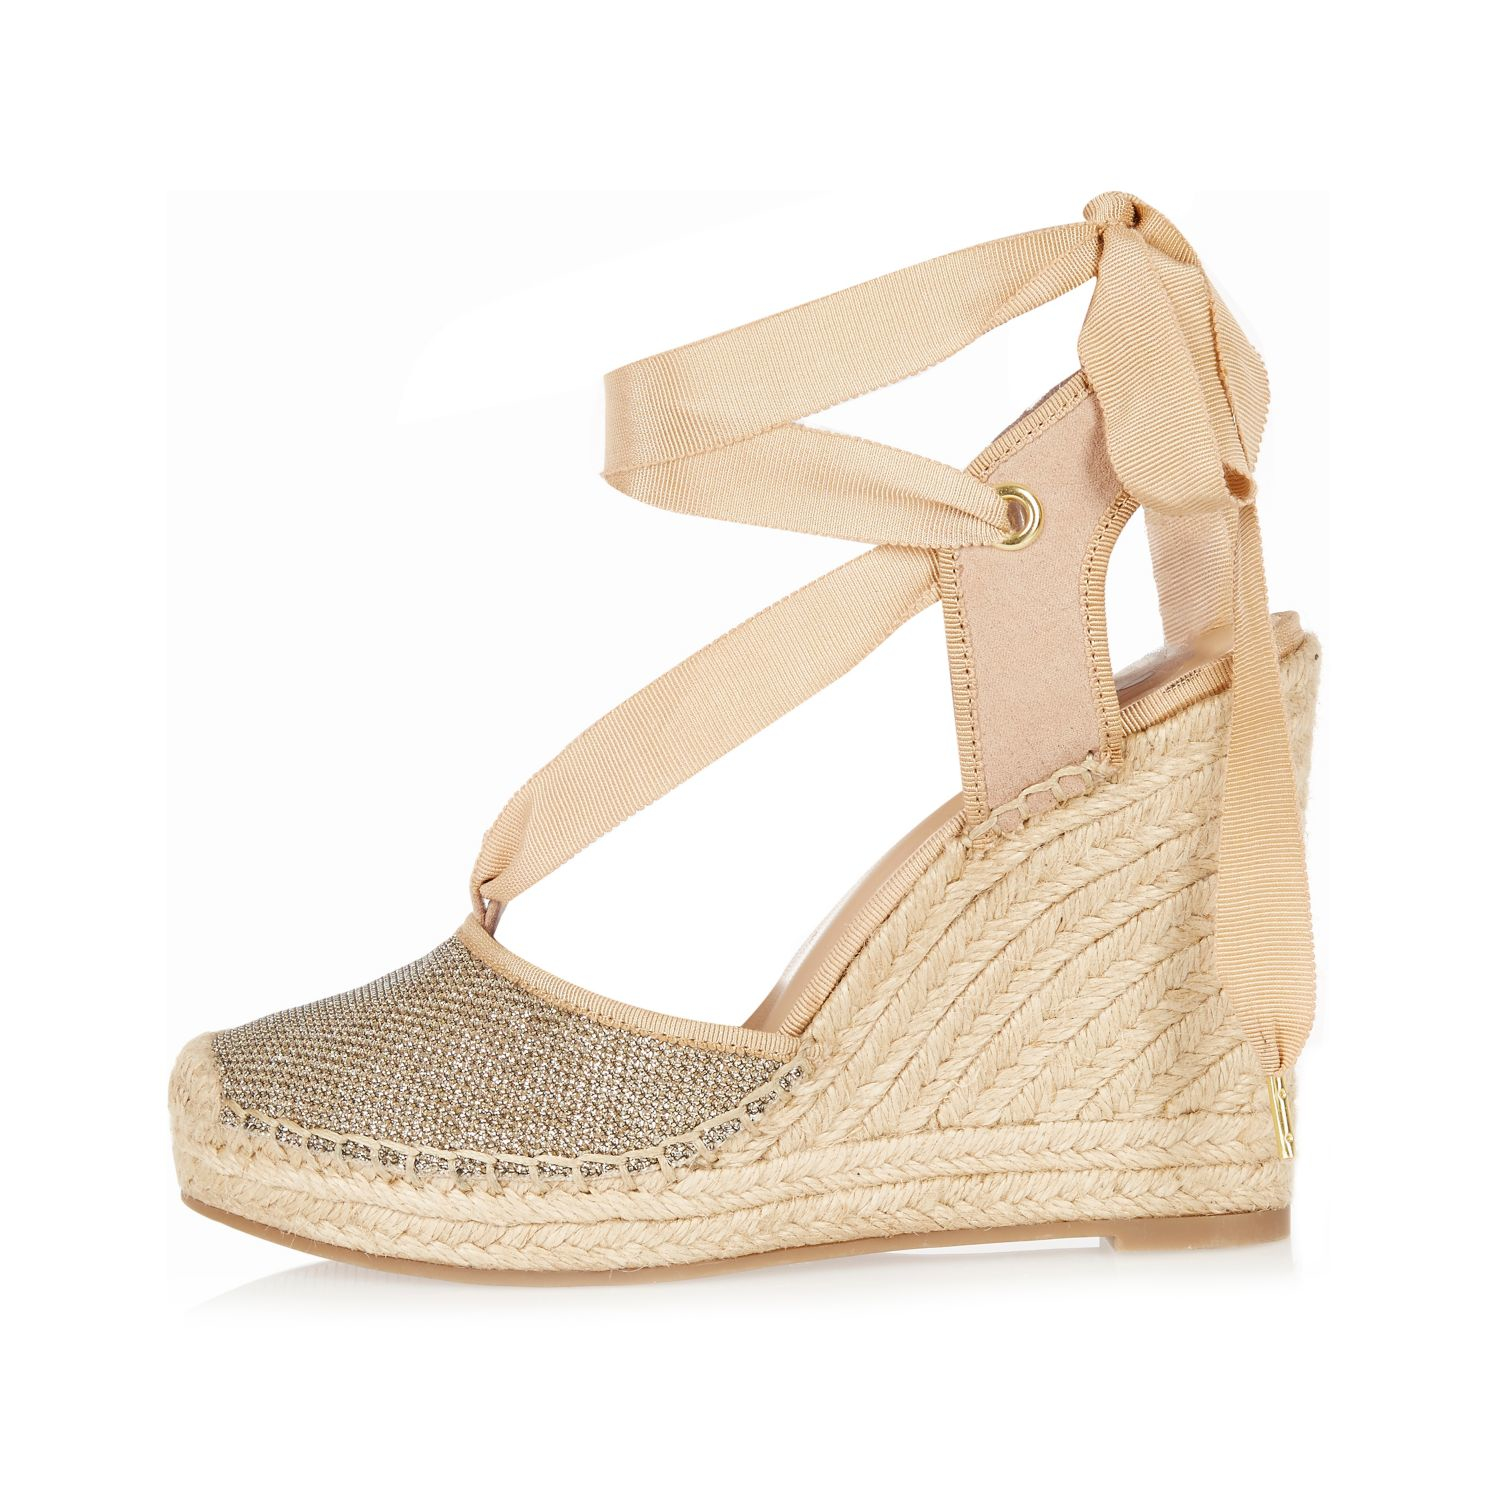 River Island Gold Lace-up Espadrille Wedges in Yellow (Metallic) - Lyst